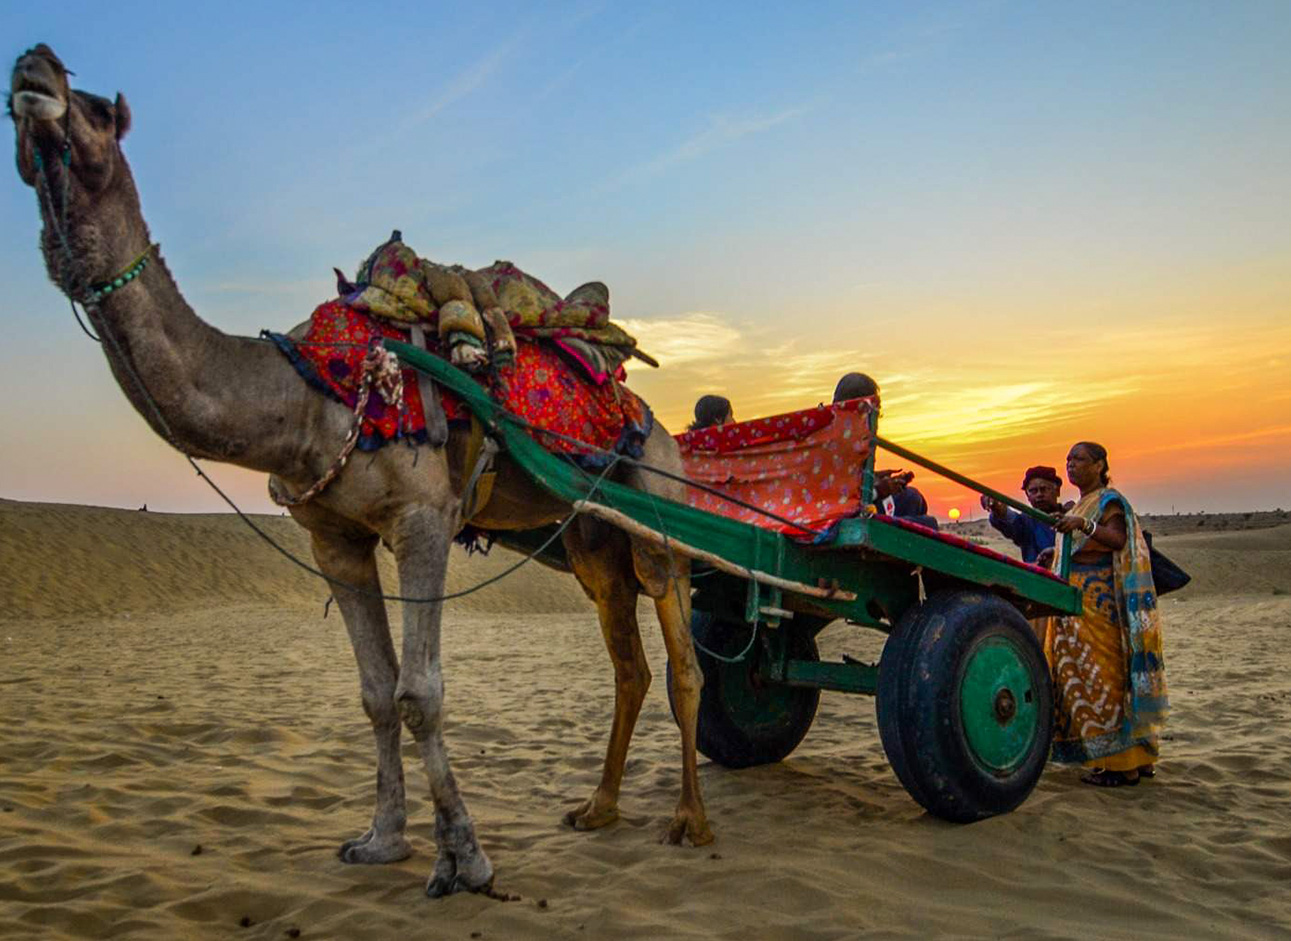 Camel Cart - Traditional transportation in scenic landscapes